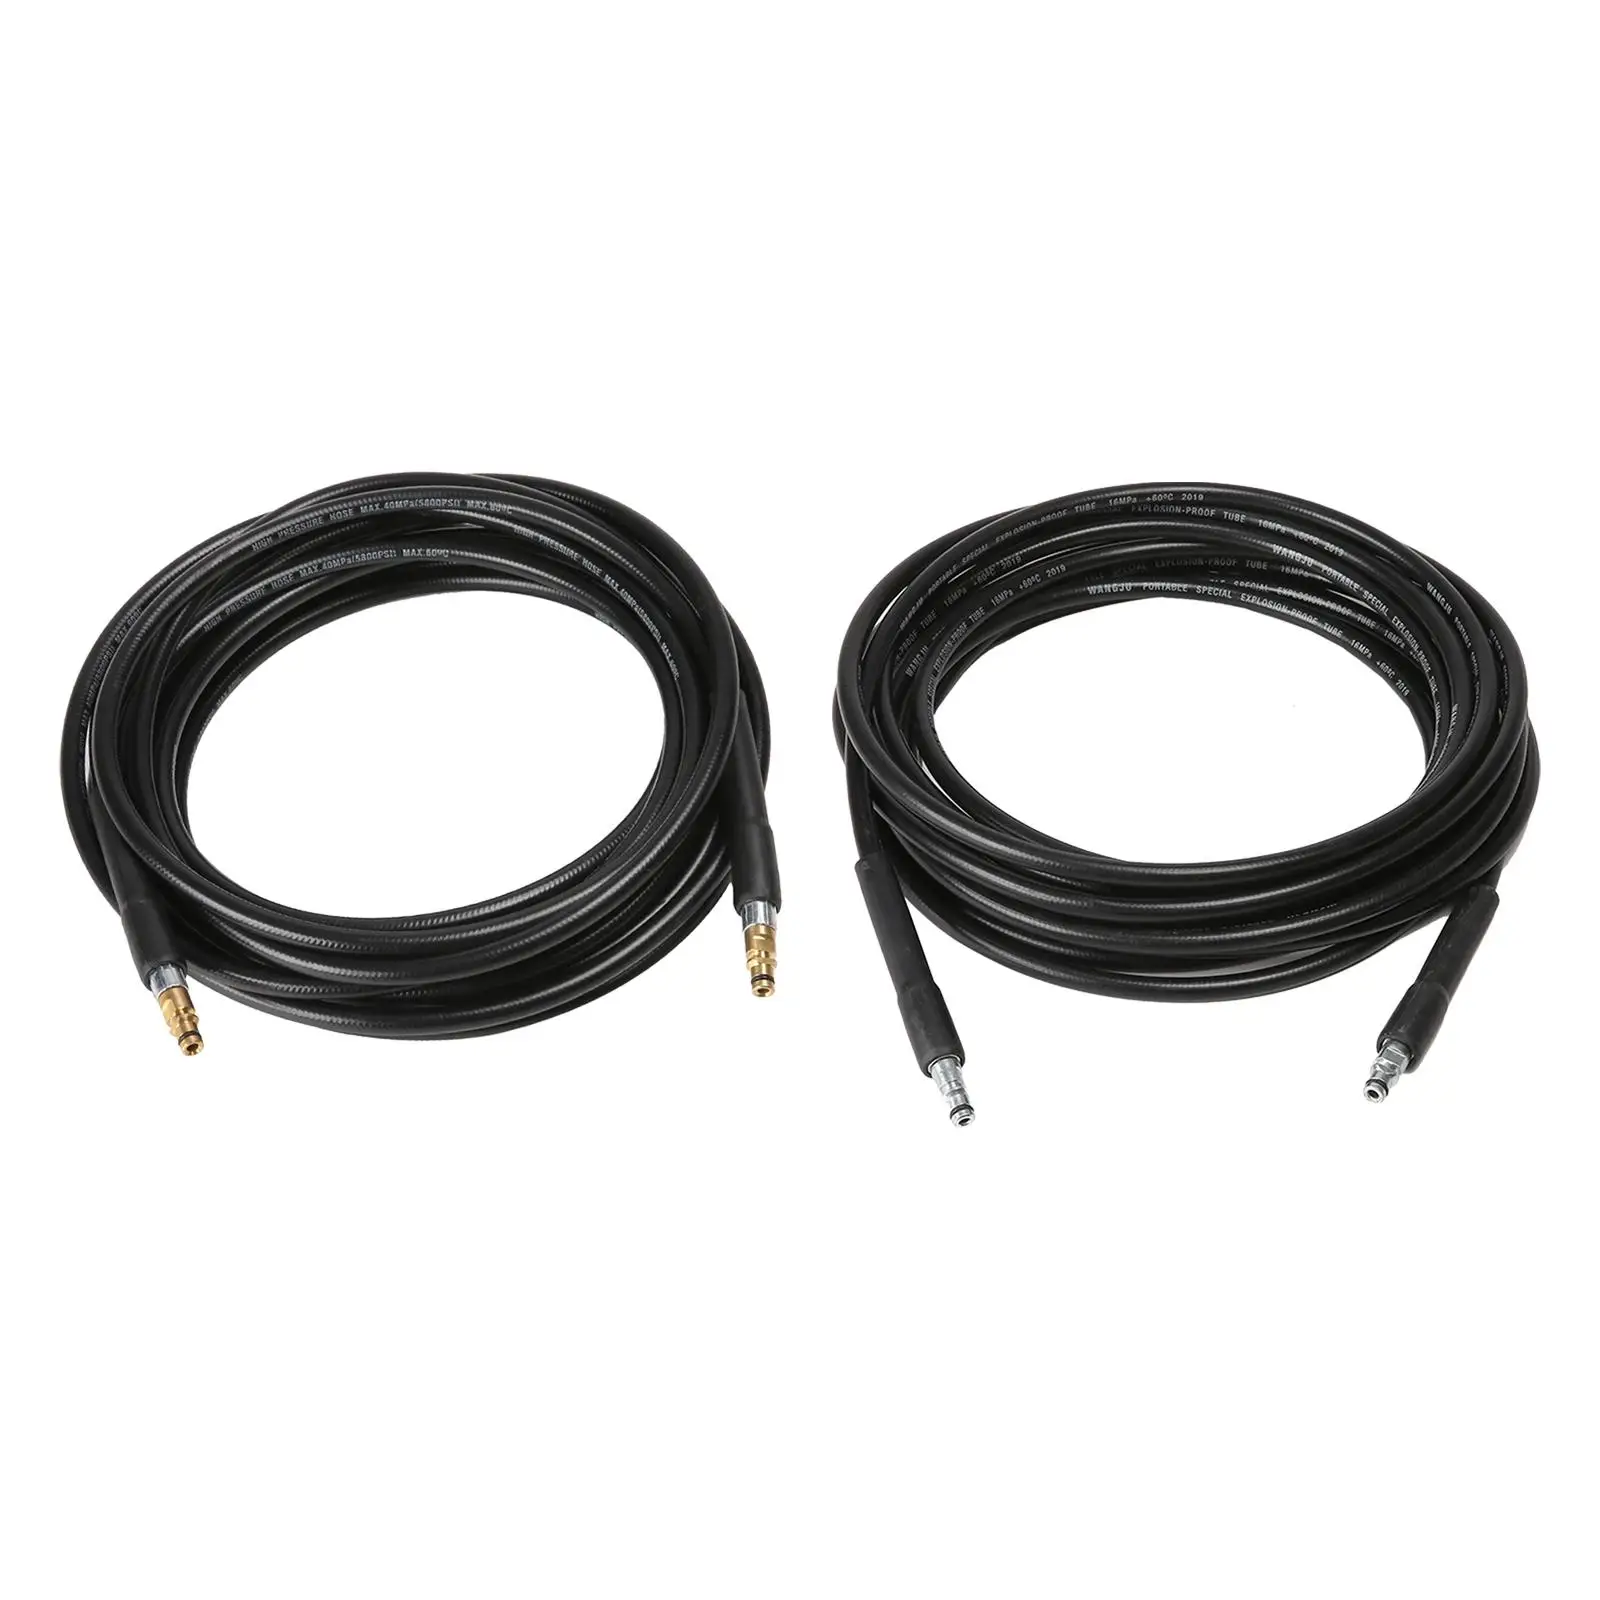 Electric wash Hose 49ft Flexible Universal Rubber Accessories Replace Quick Connect Pressure Washing Extension Hose